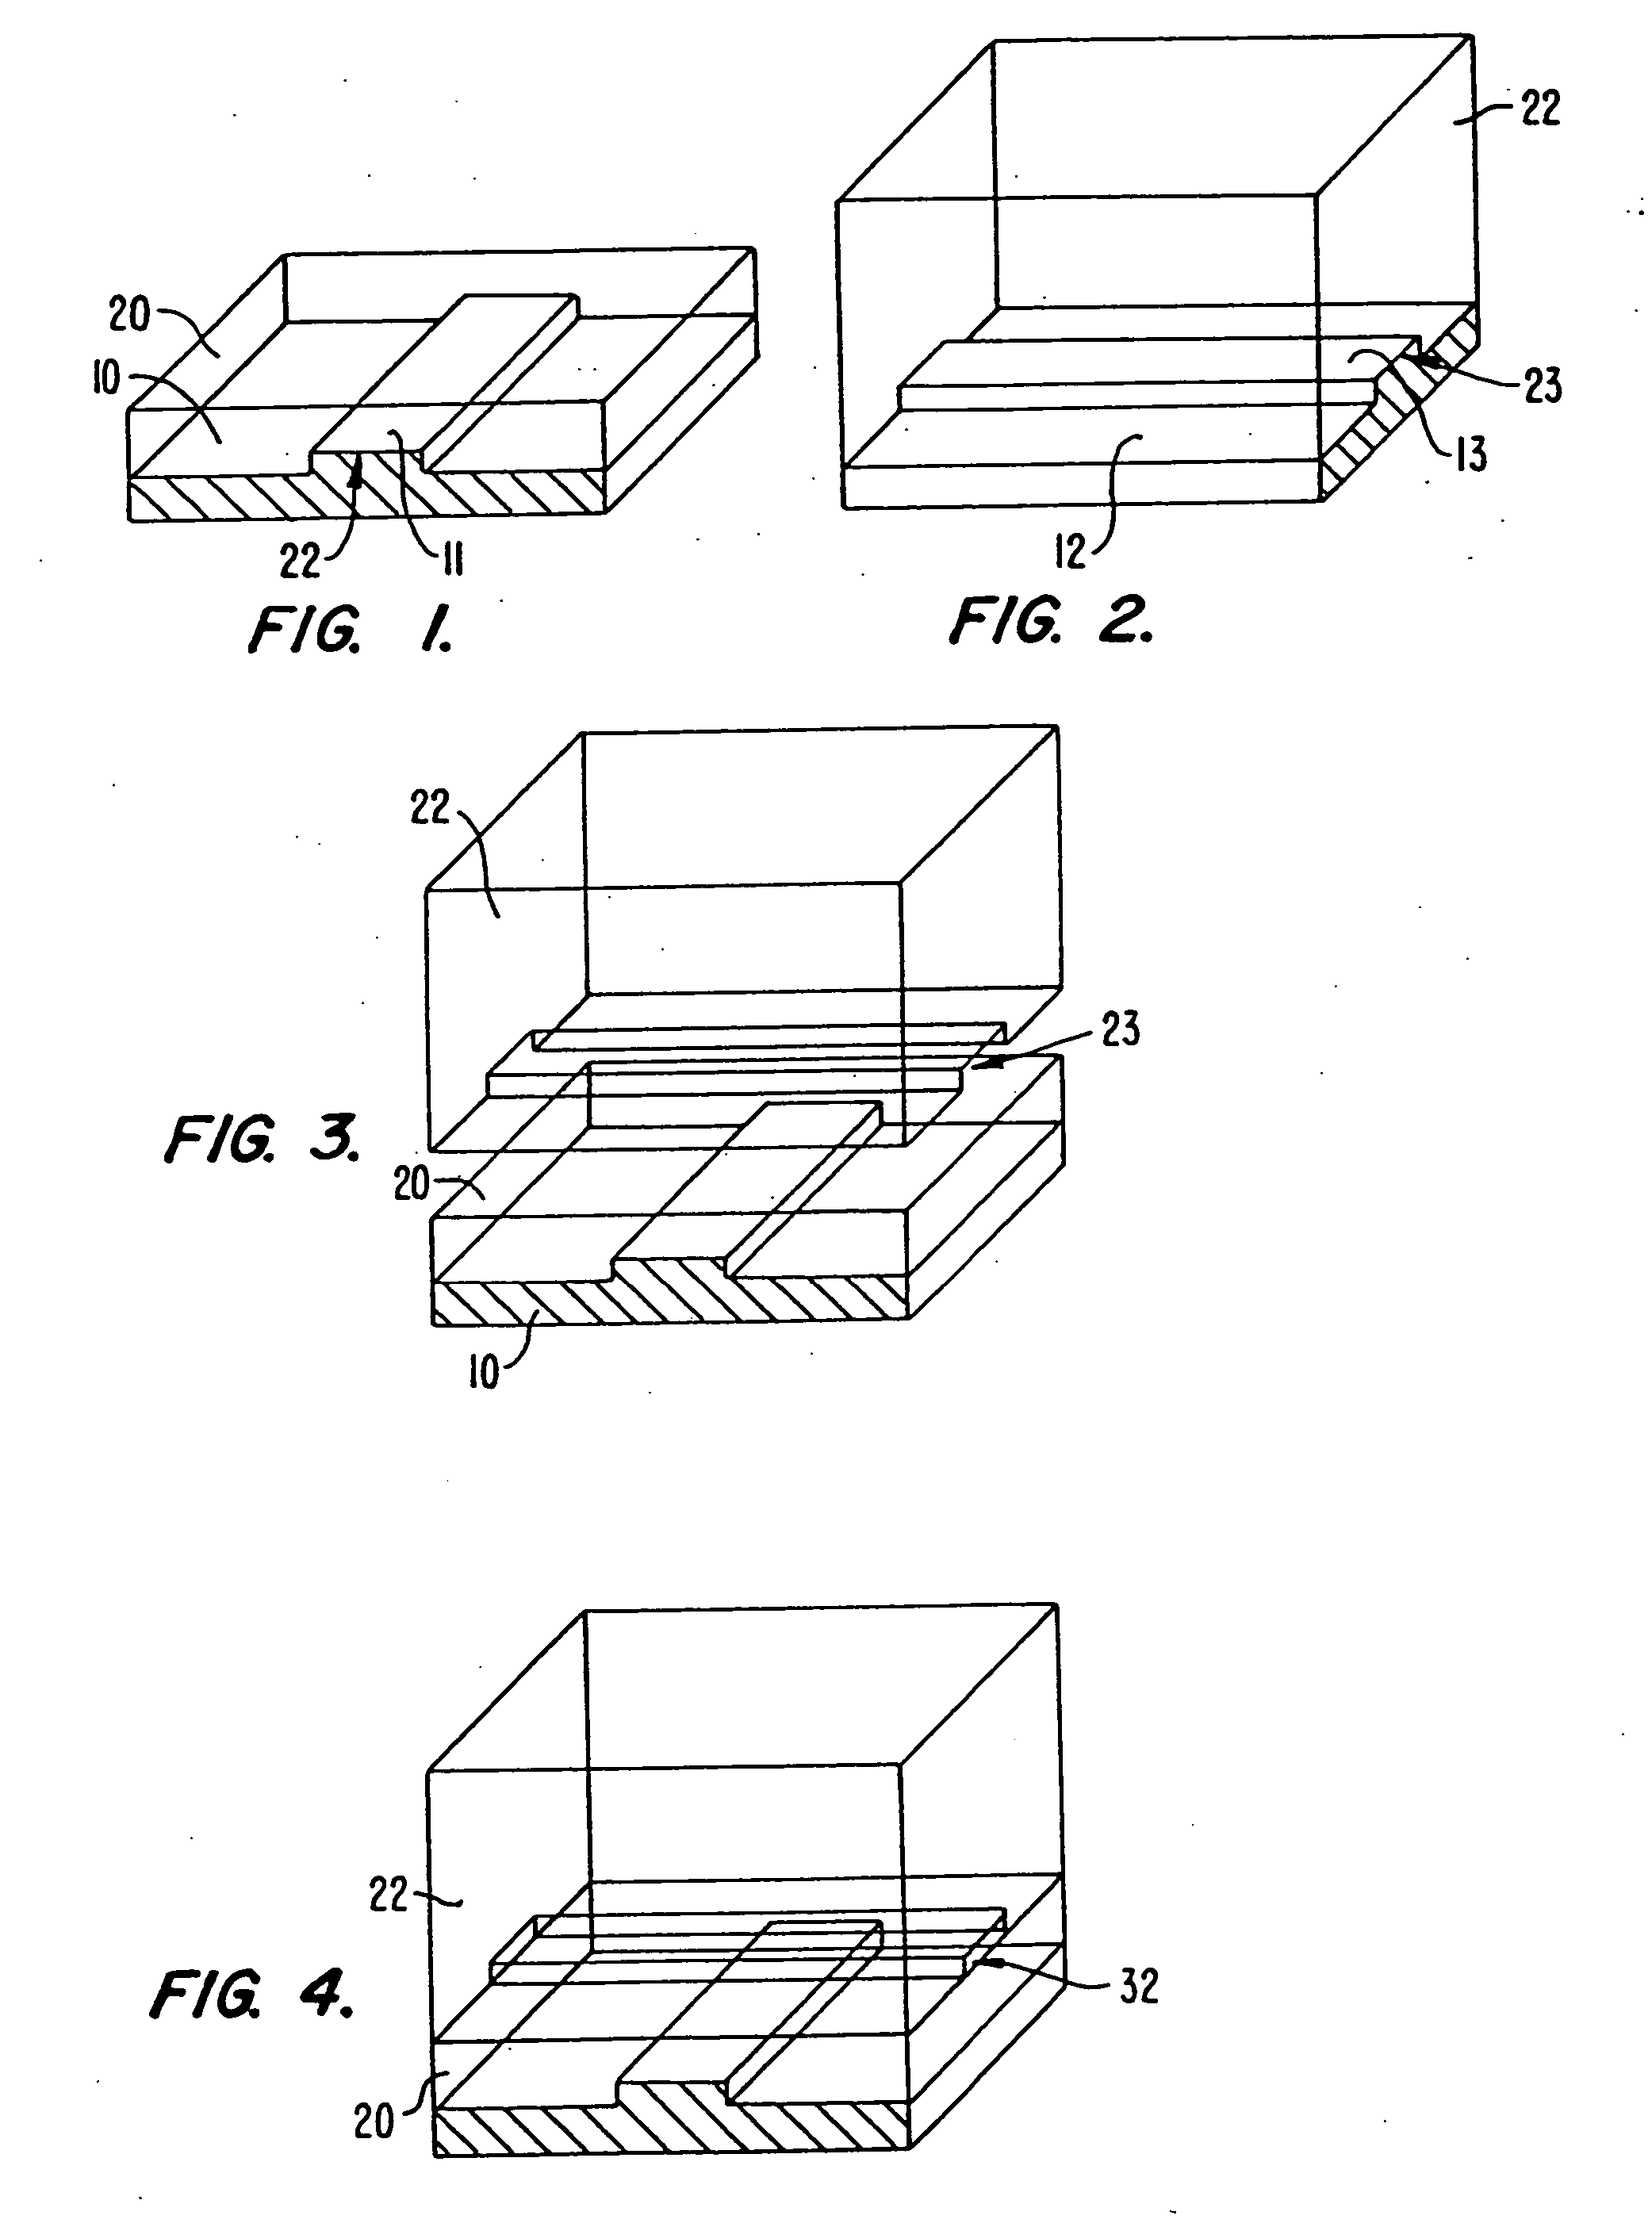 Microfabricated elastomeric valve and pump systems